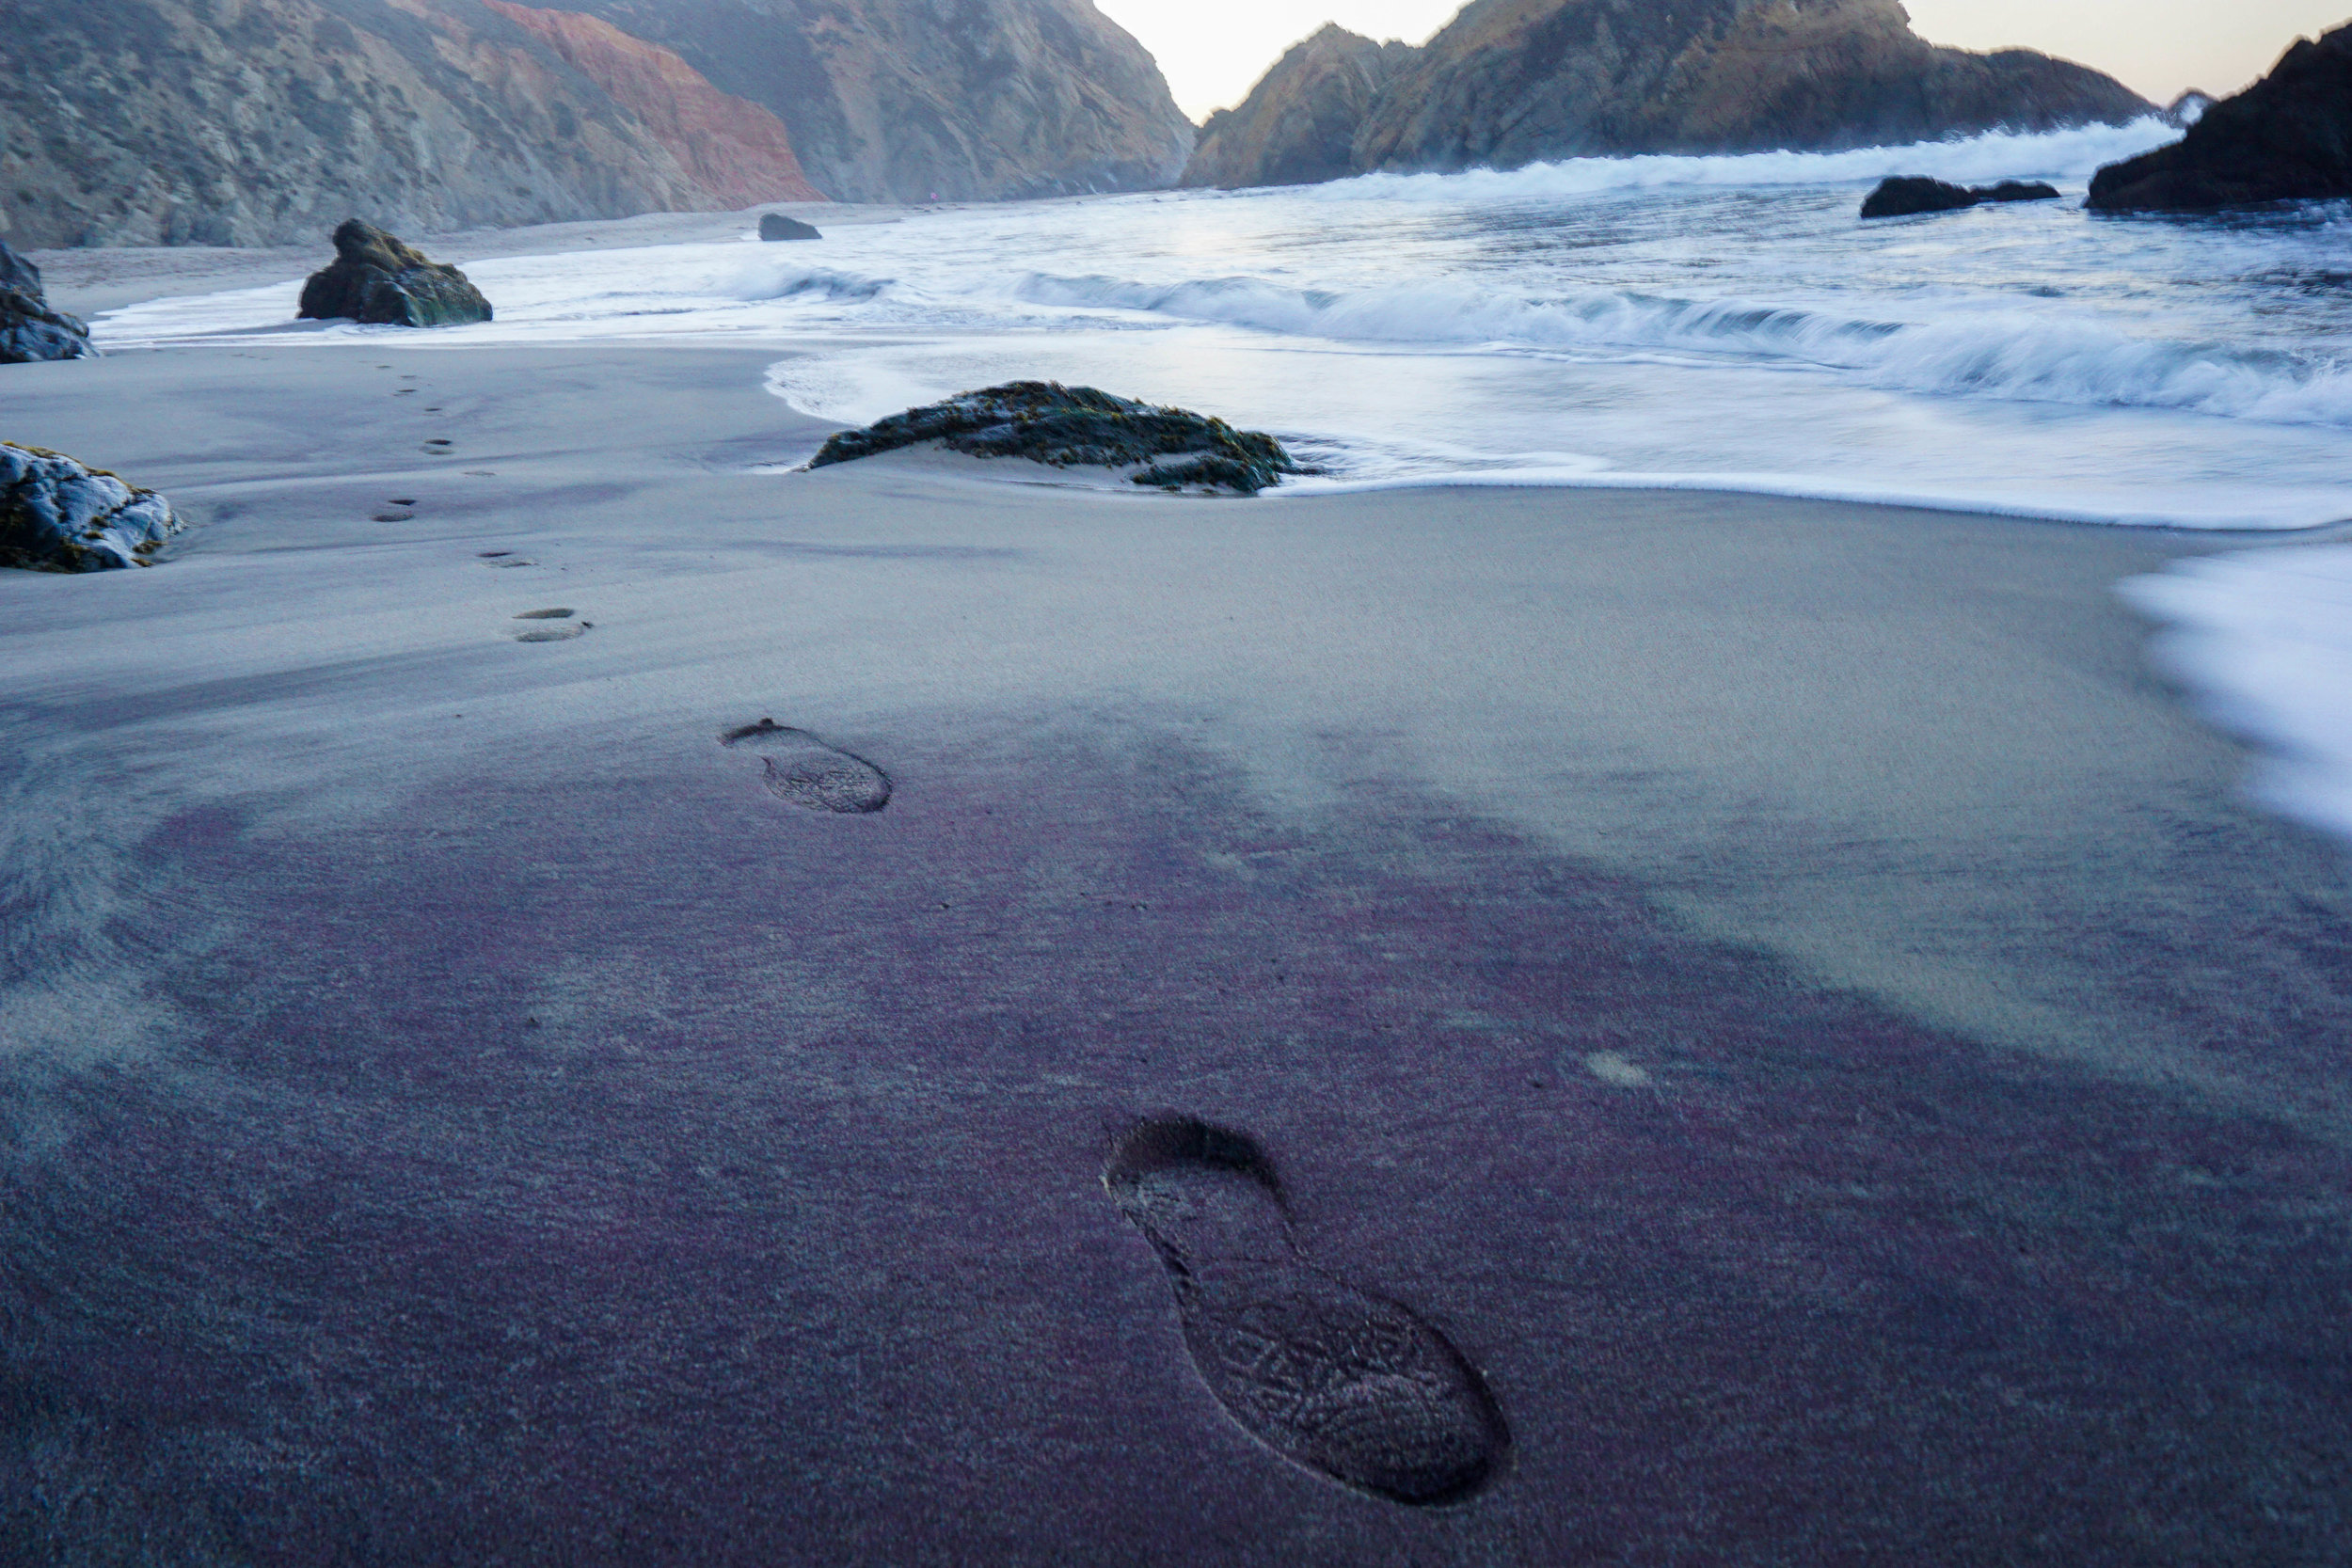 Minerals wash from the cliffs during the frequent rains, leaving purple streaks along the sandy shore.